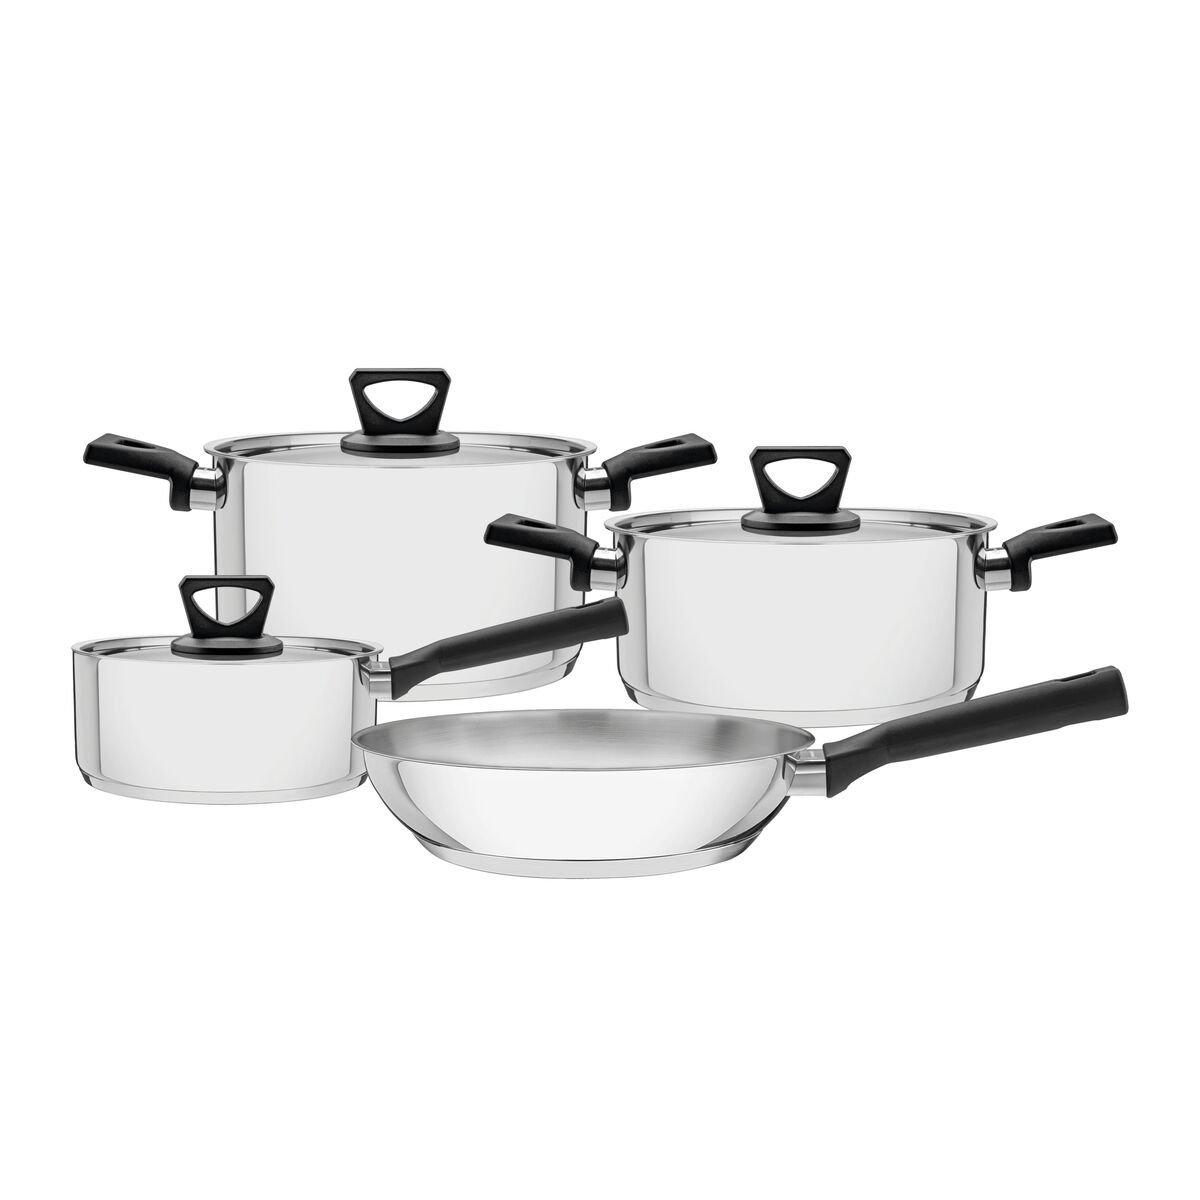 Tramontina Brava Bakelite stainless steel cookware set with tri-ply base and Bakelite handles, 4 pc set